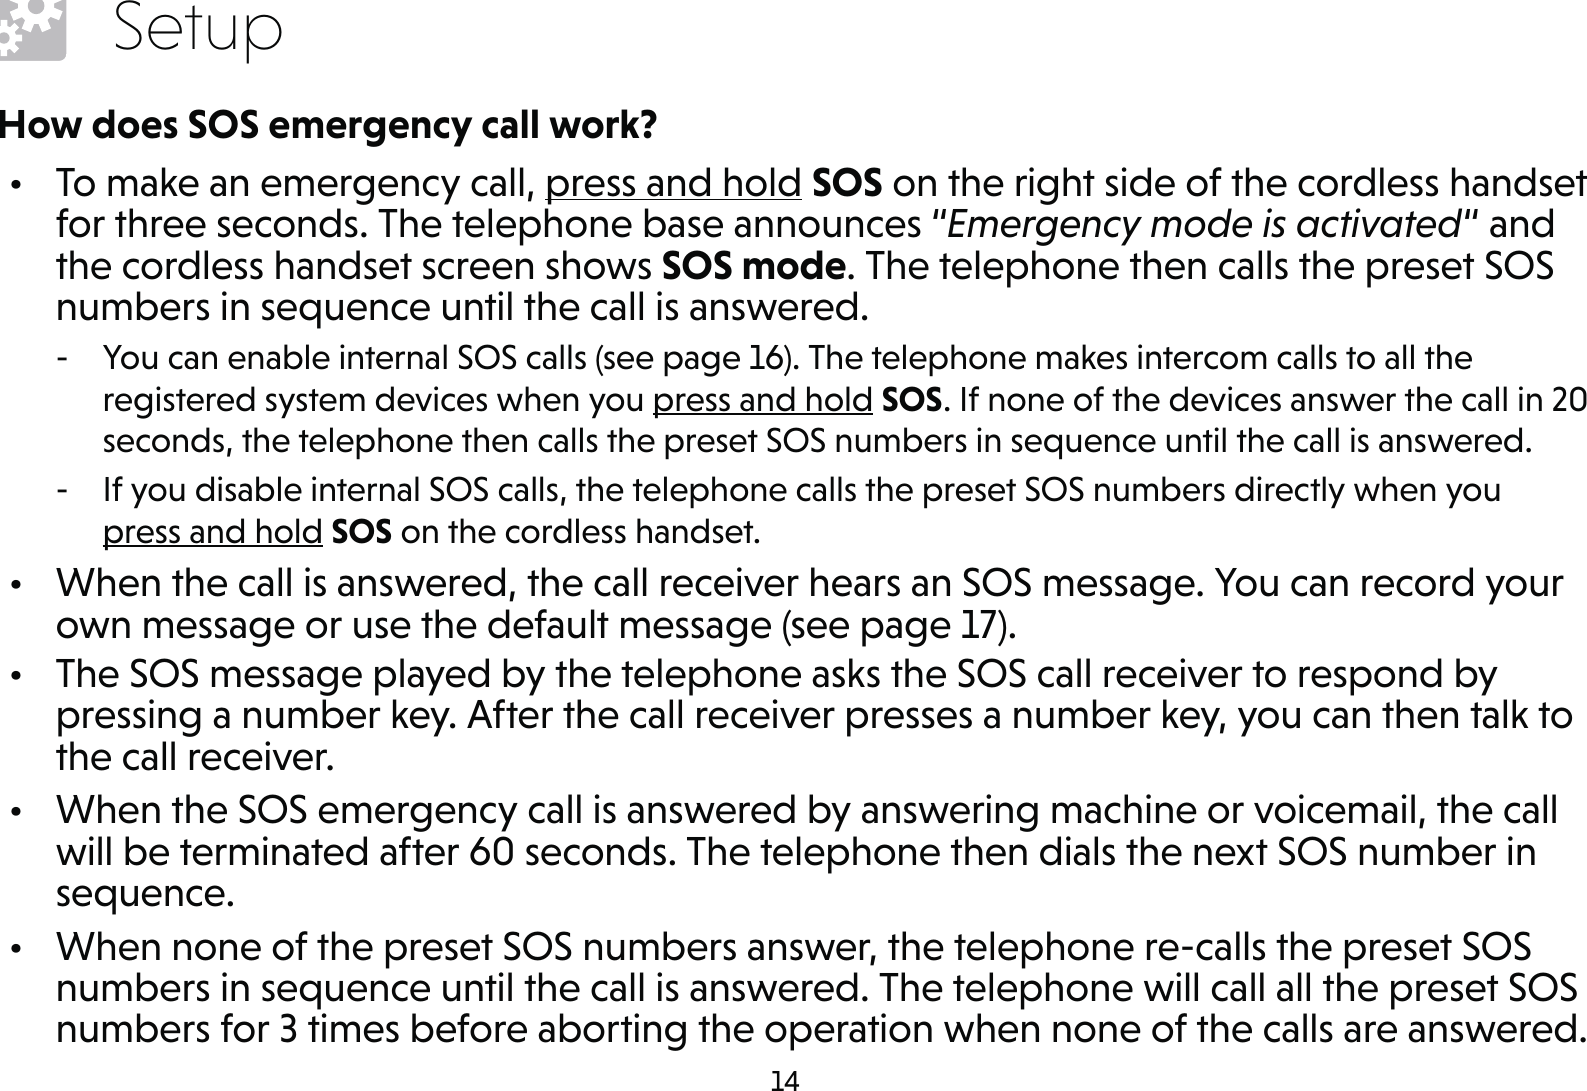 14SetupHow does SOS emergency call work?•  To make an emergency call, press and hold SOS on the right side of the cordless handset for three seconds. The telephone base announces “Emergency mode is activated“ and the cordless handset screen shows SOS mode. The telephone then calls the preset SOS numbers in sequence until the call is answered. - You can enable internal SOS calls (see page 16). The telephone makes intercom calls to all the registered system devices when you press and hold SOS. If none of the devices answer the call in 20 seconds, the telephone then calls the preset SOS numbers in sequence until the call is answered. - If you disable internal SOS calls, the telephone calls the preset SOS numbers directly when you  press and hold SOS on the cordless handset.•  When the call is answered, the call receiver hears an SOS message. You can record your own message or use the default message (see page 17).•  The SOS message played by the telephone asks the SOS call receiver to respond by pressing a number key. After the call receiver presses a number key, you can then talk to the call receiver.•  When the SOS emergency call is answered by answering machine or voicemail, the call will be terminated after 60 seconds. The telephone then dials the next SOS number in sequence.•  When none of the preset SOS numbers answer, the telephone re-calls the preset SOS numbers in sequence until the call is answered. The telephone will call all the preset SOS numbers for 3 times before aborting the operation when none of the calls are answered.